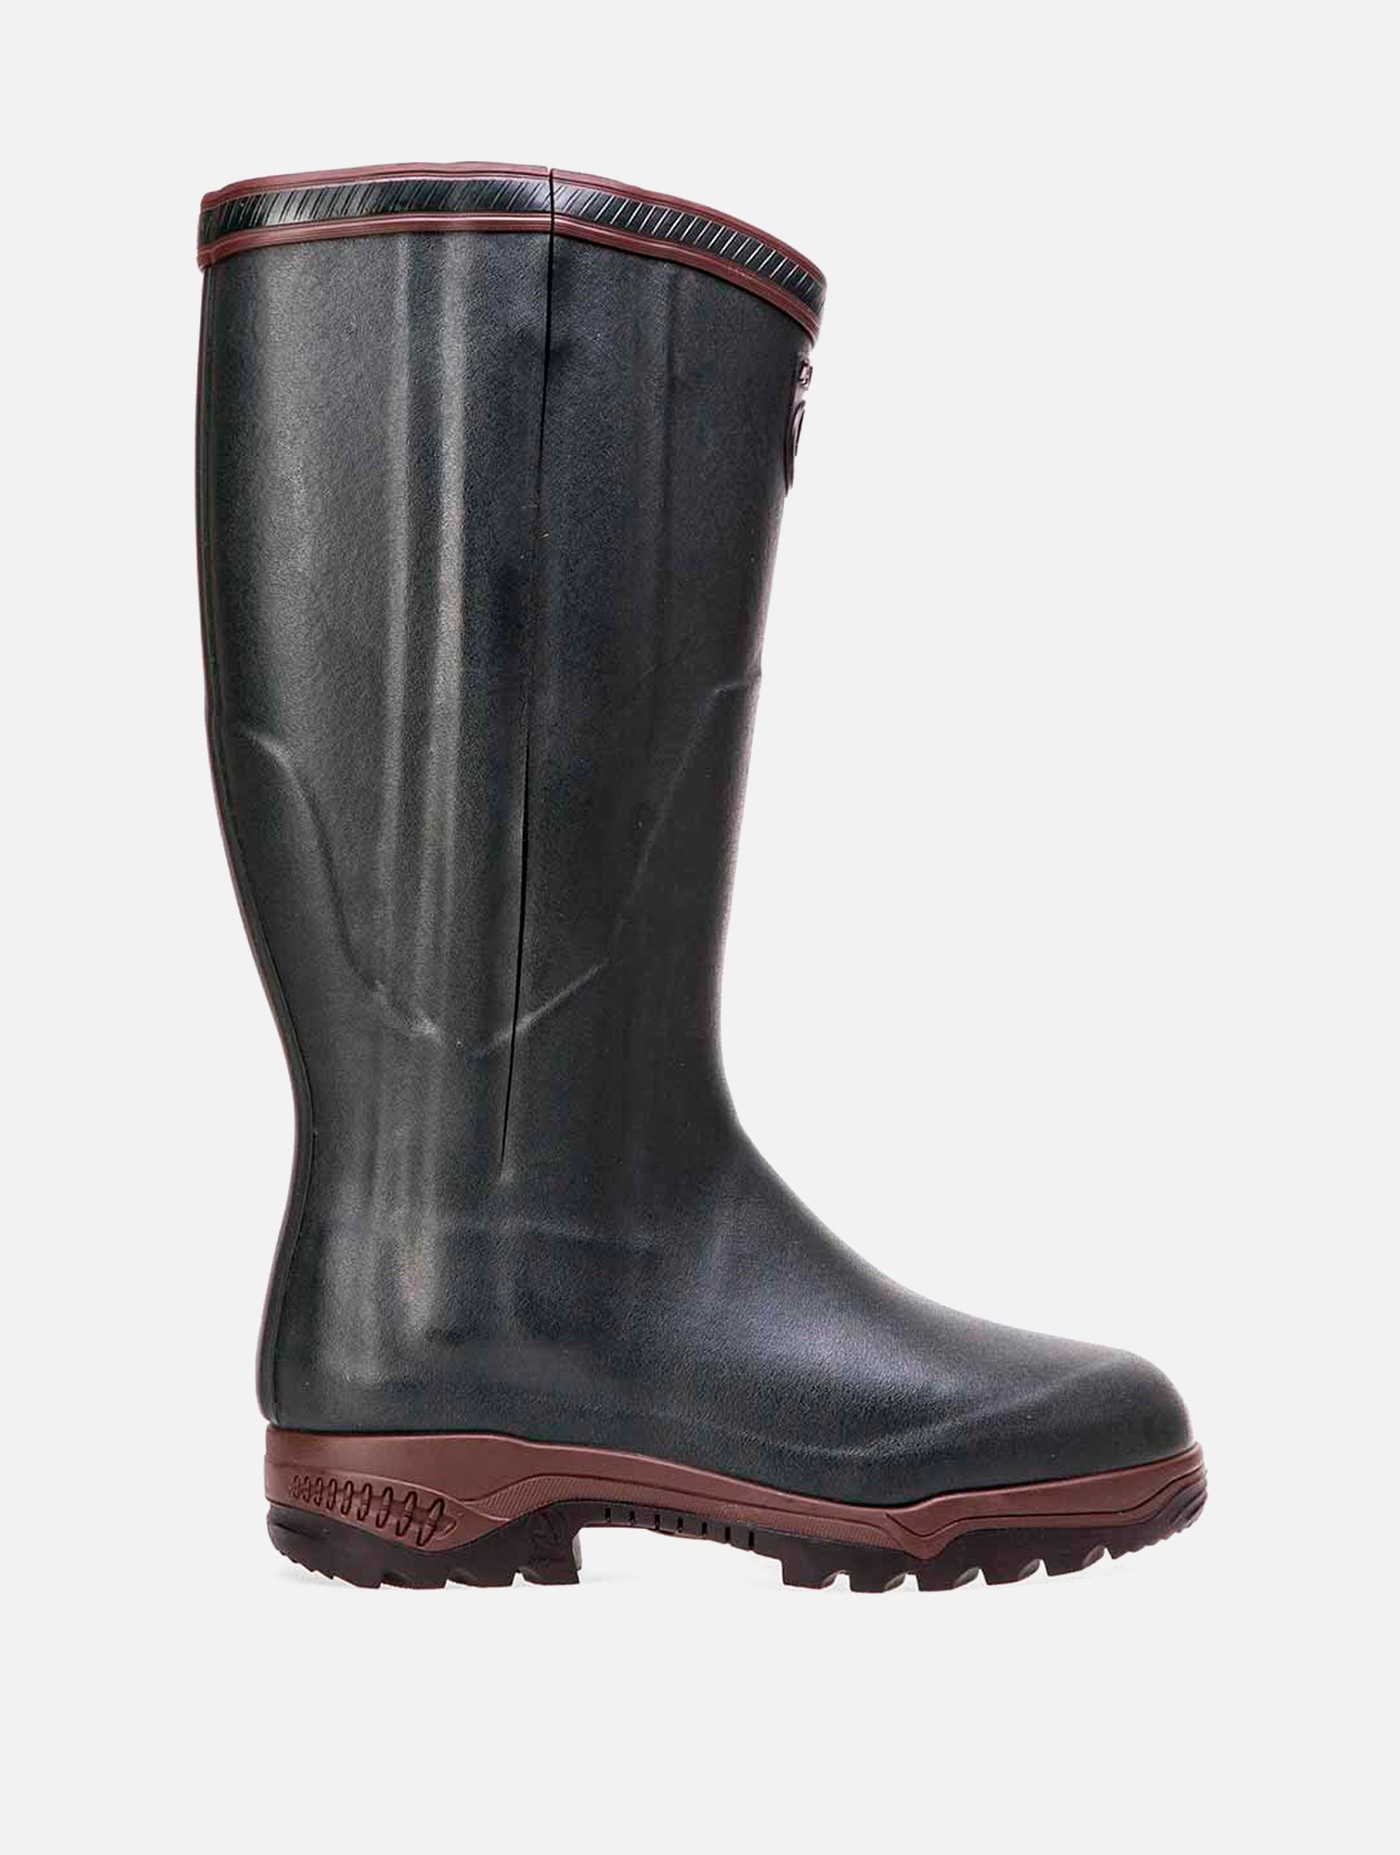 Aigle - Anti-fatigue adjustable boots for cold weather, Made in Bronze - Parcours® iso open | AIGLE